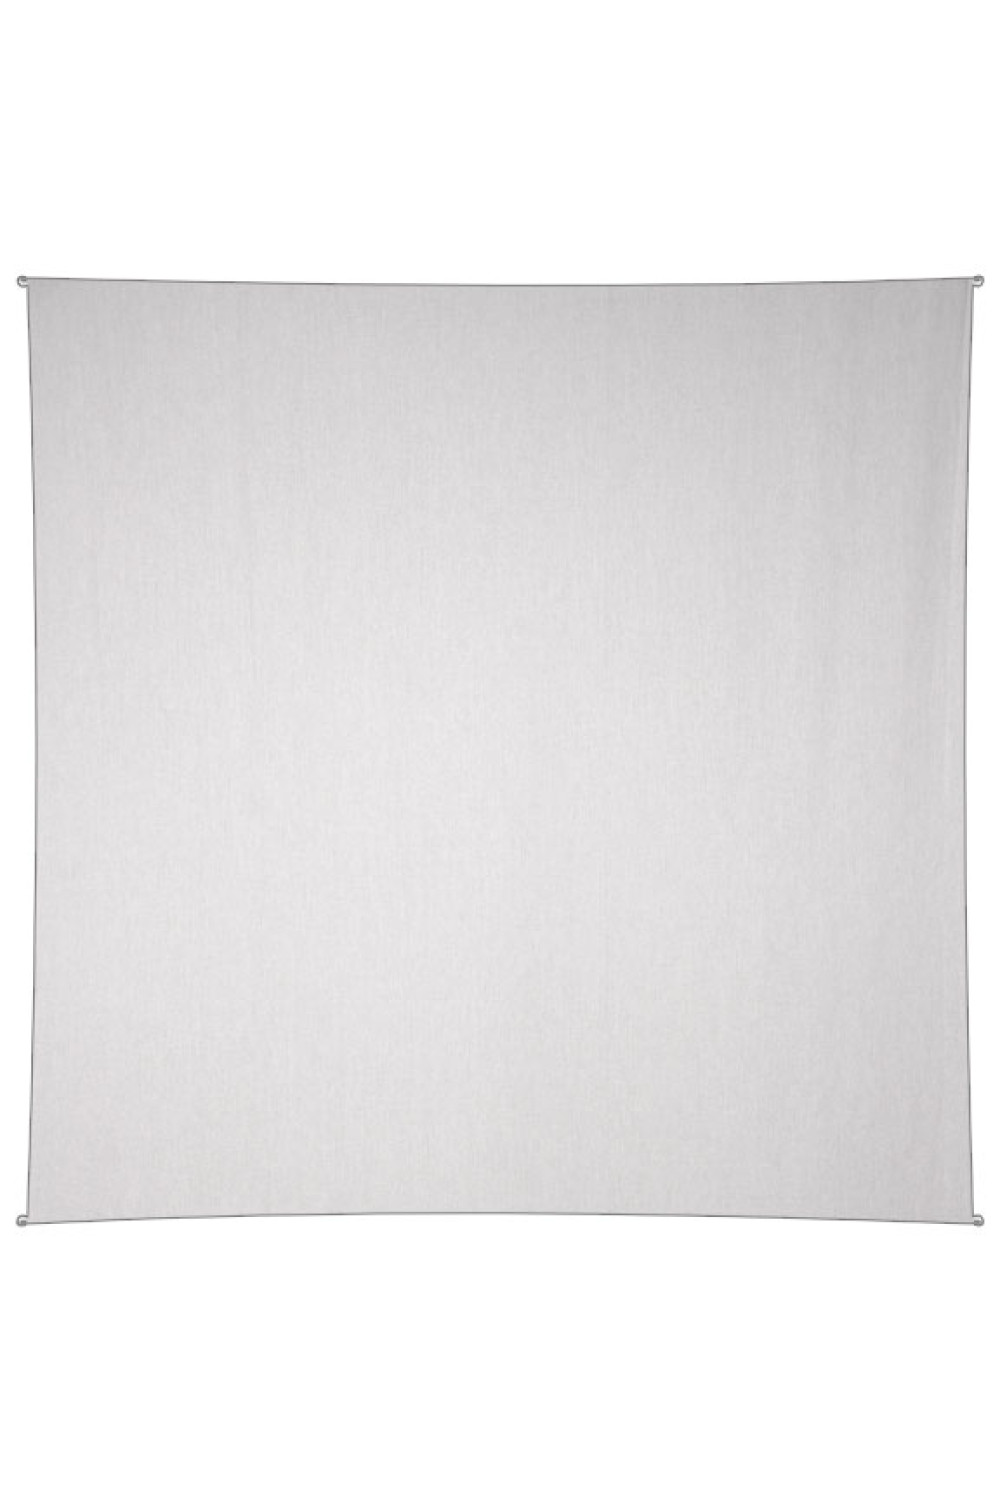 Blank White Tapestry 58x58 100% Cotton  **RESERVE NOW FOR EARLY NOVEMBER DELIVERY**